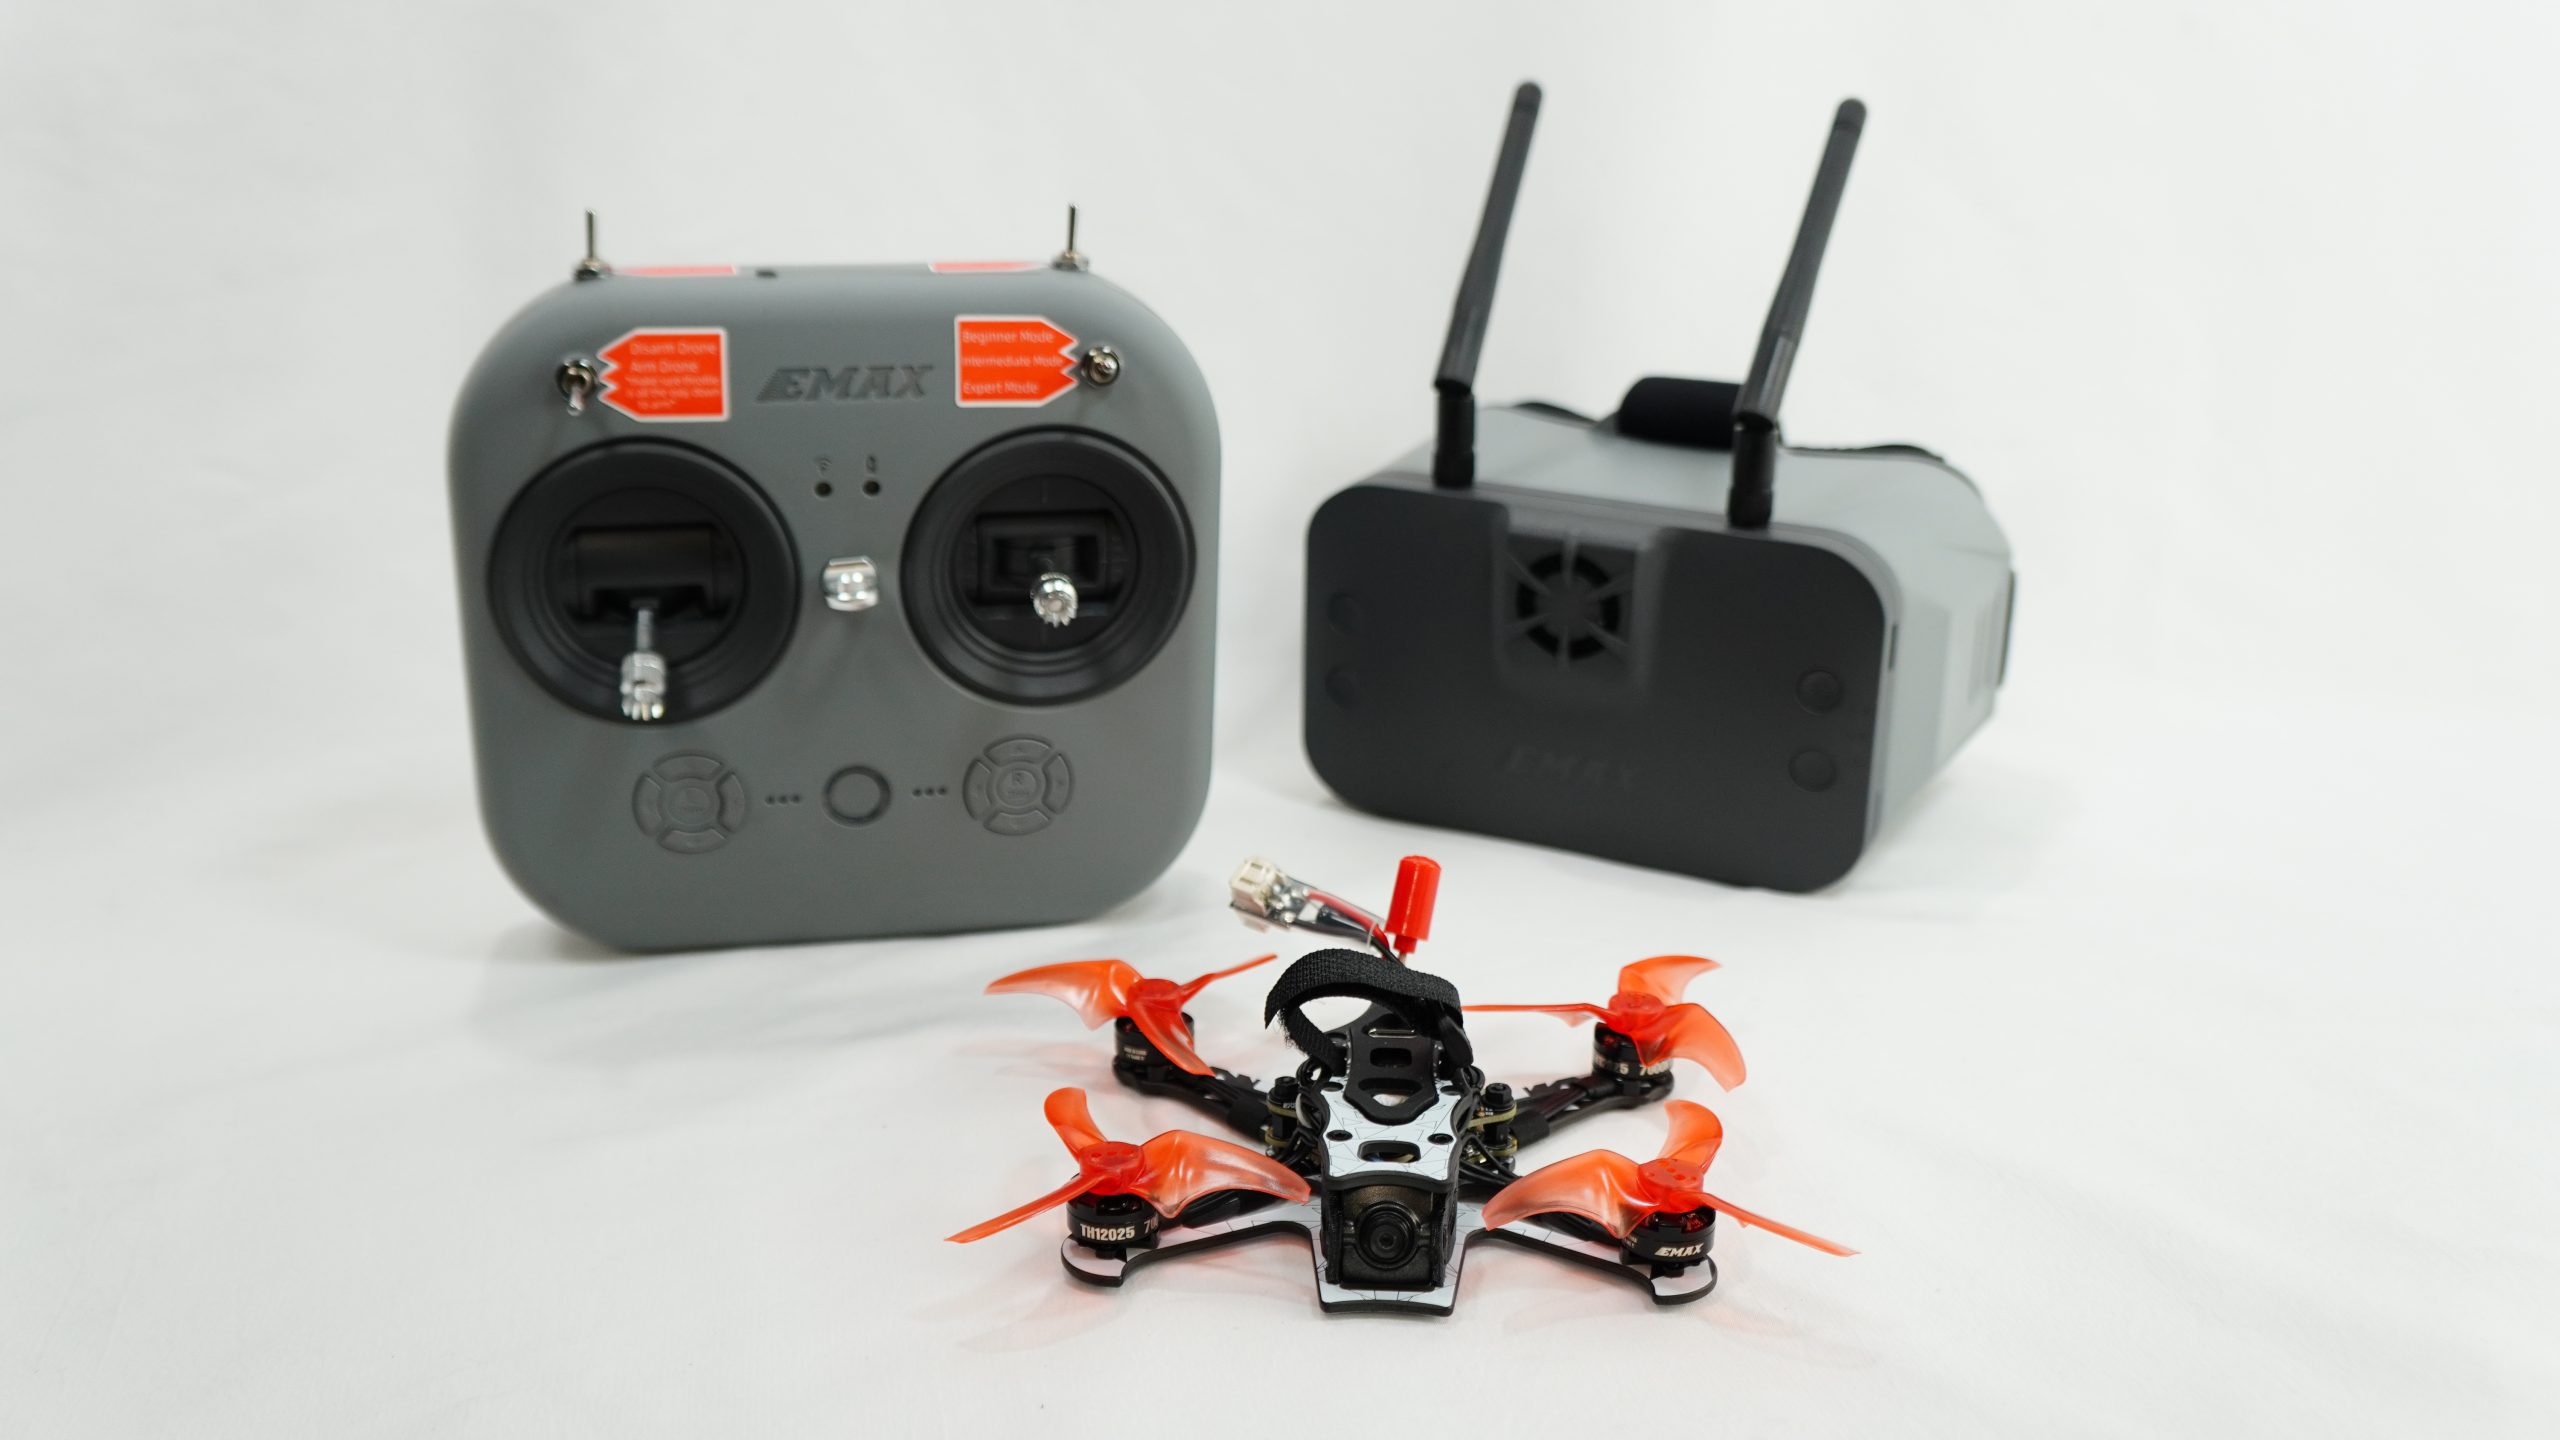 WiMiUS L2 4K is an impressive affordable action camera [Review] - 3DR SOLO  - diydrones